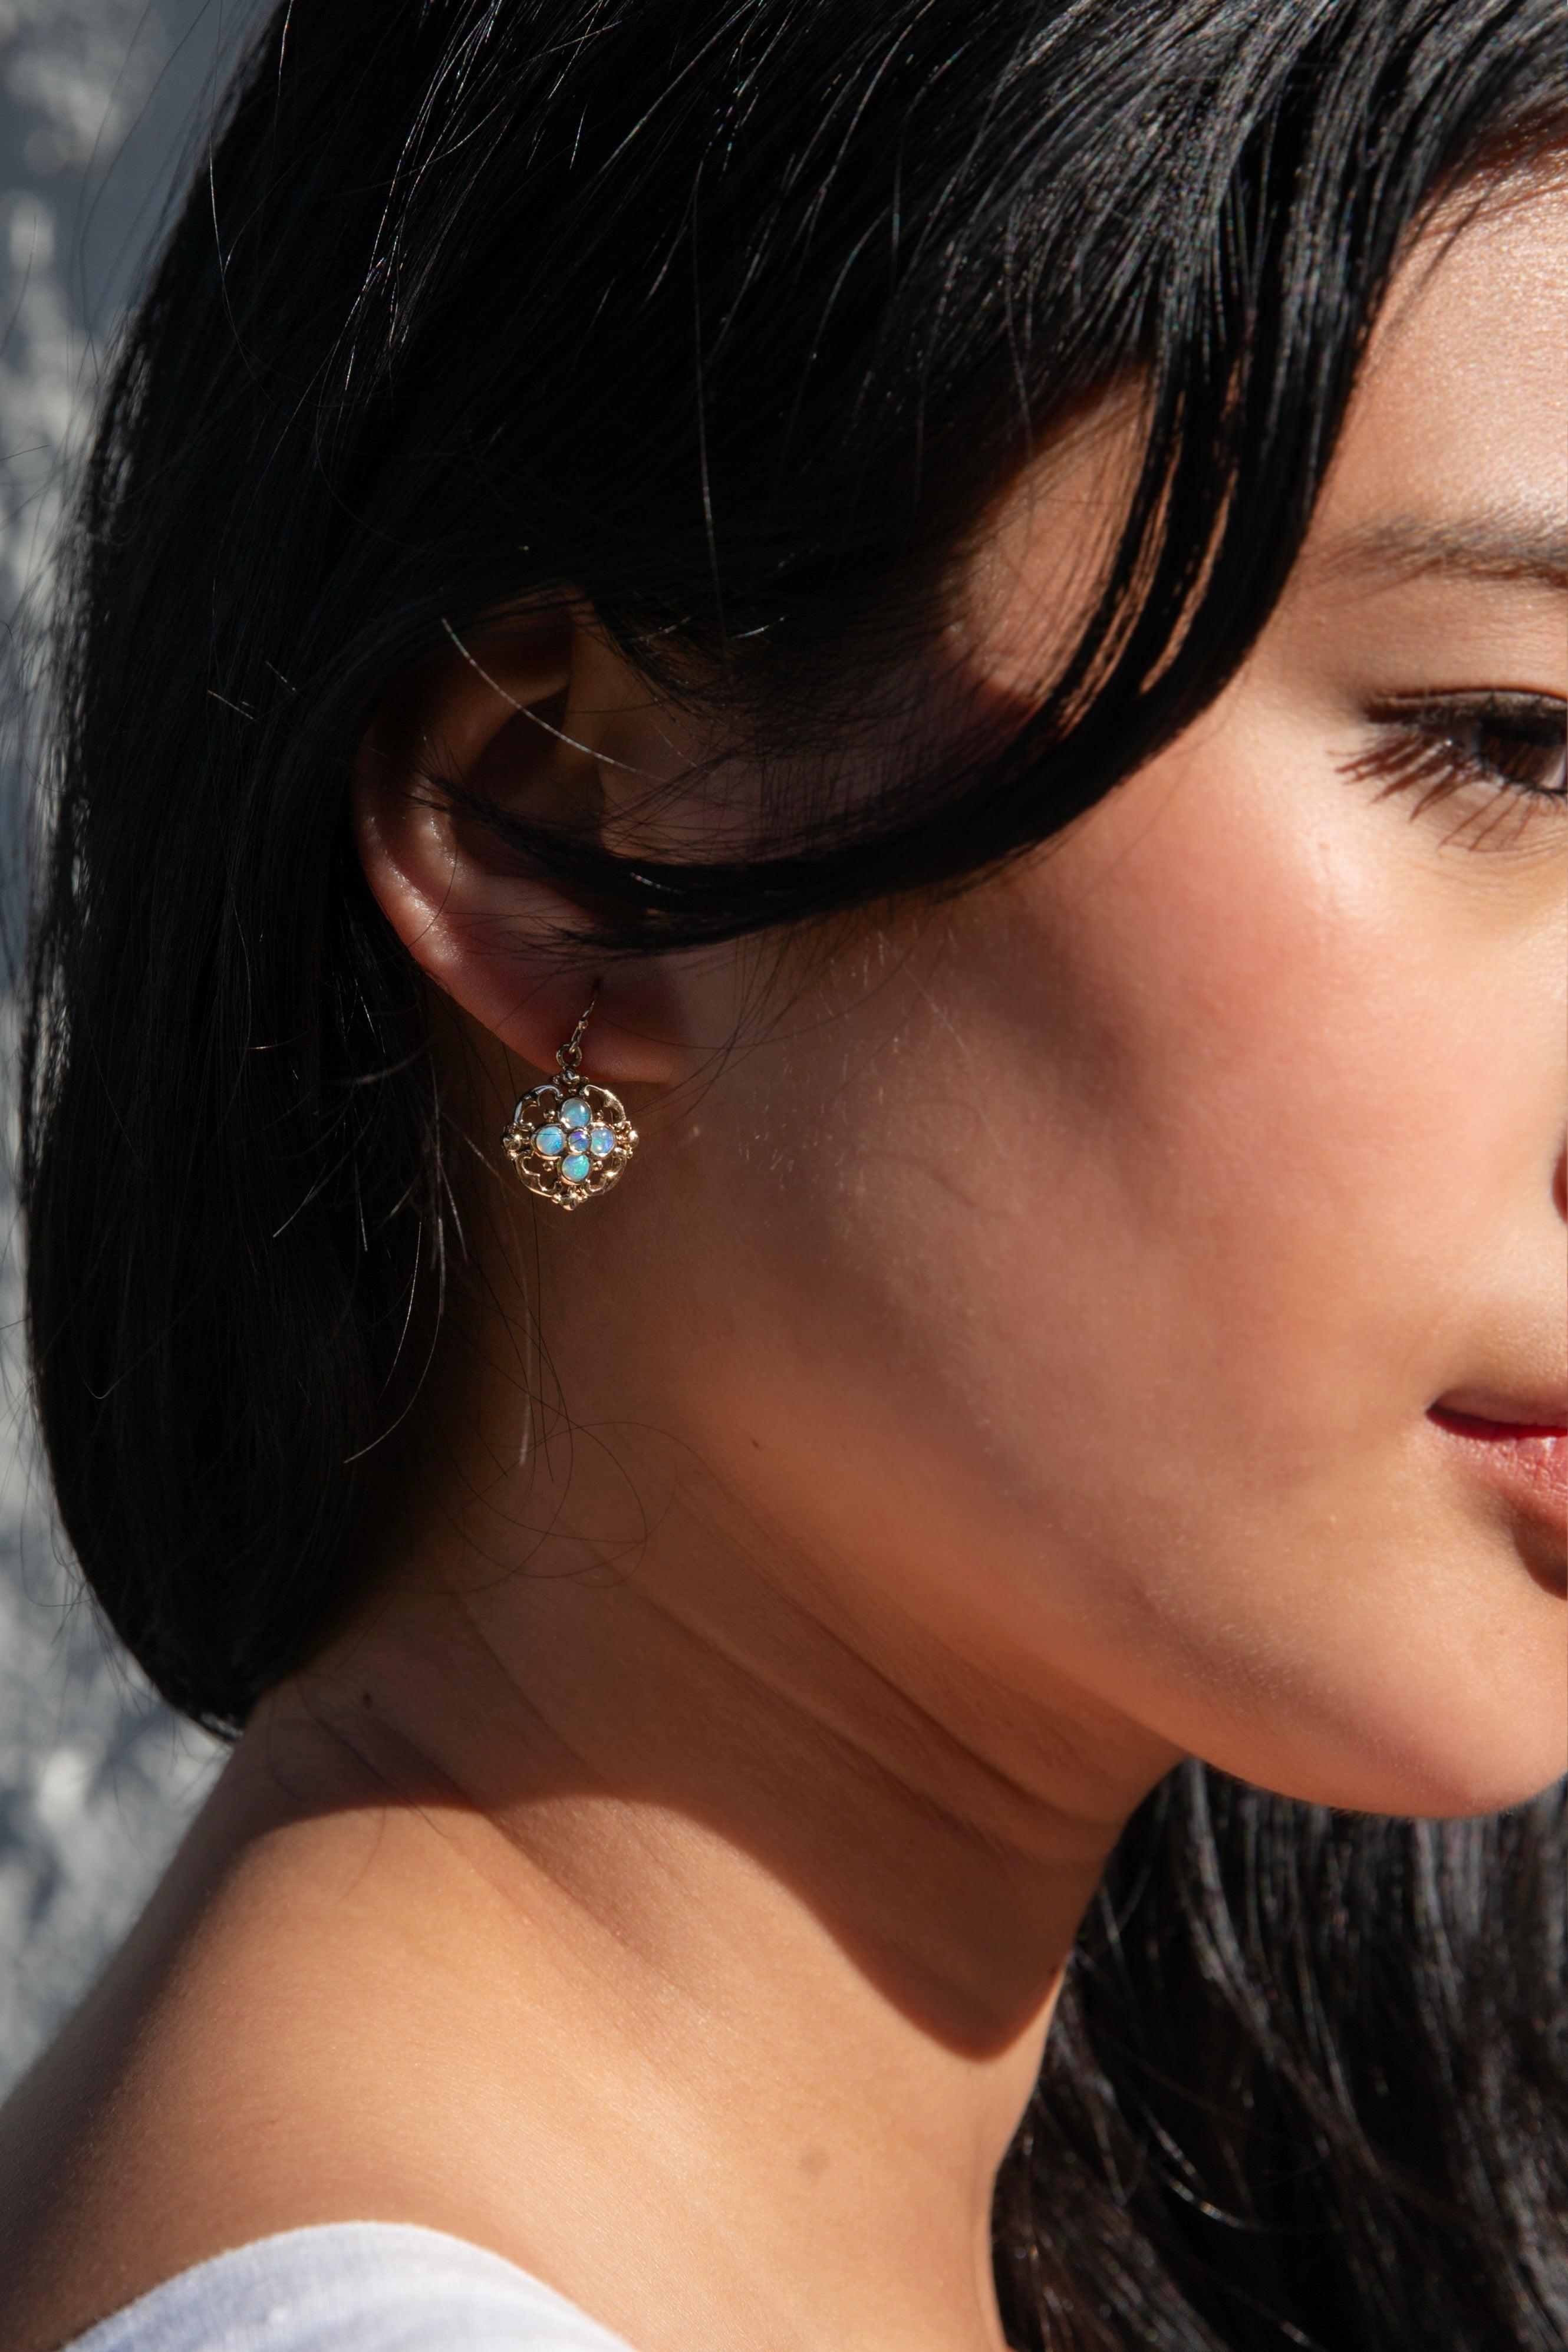 Her opals are set in gold frames of hearts and flowers, illustrative of the profound and sweet fragility that is the beginnings of new love.

The Faye Earrings Gem Details
The round solid Australian crystal opal cabochons display blue, green and